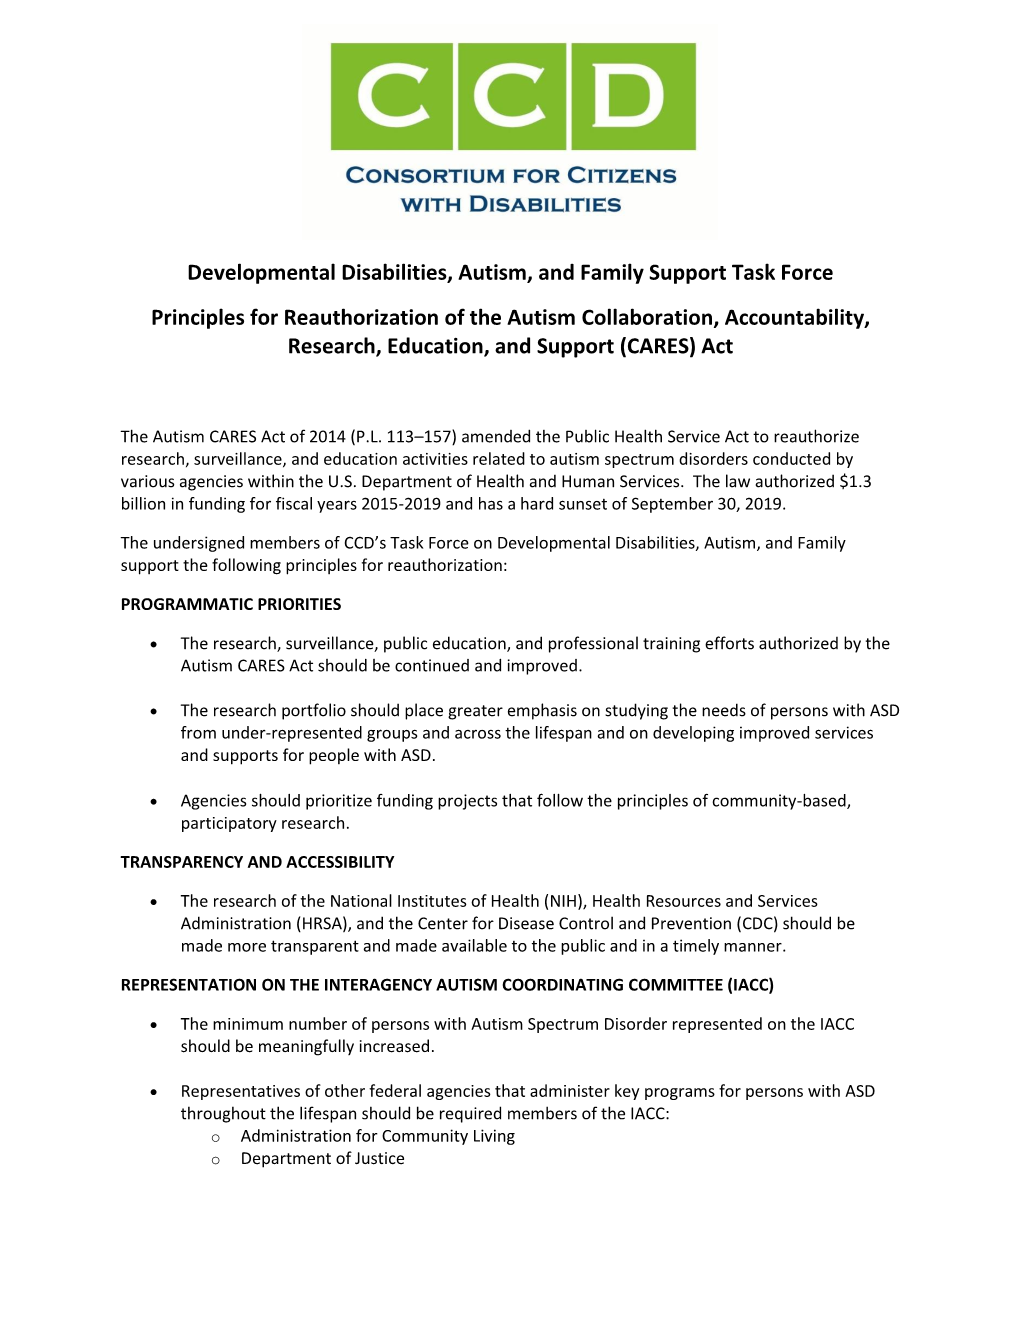 DD, Autism, & Family Support Task Force Principles for Autism CARES Act Reauthorization